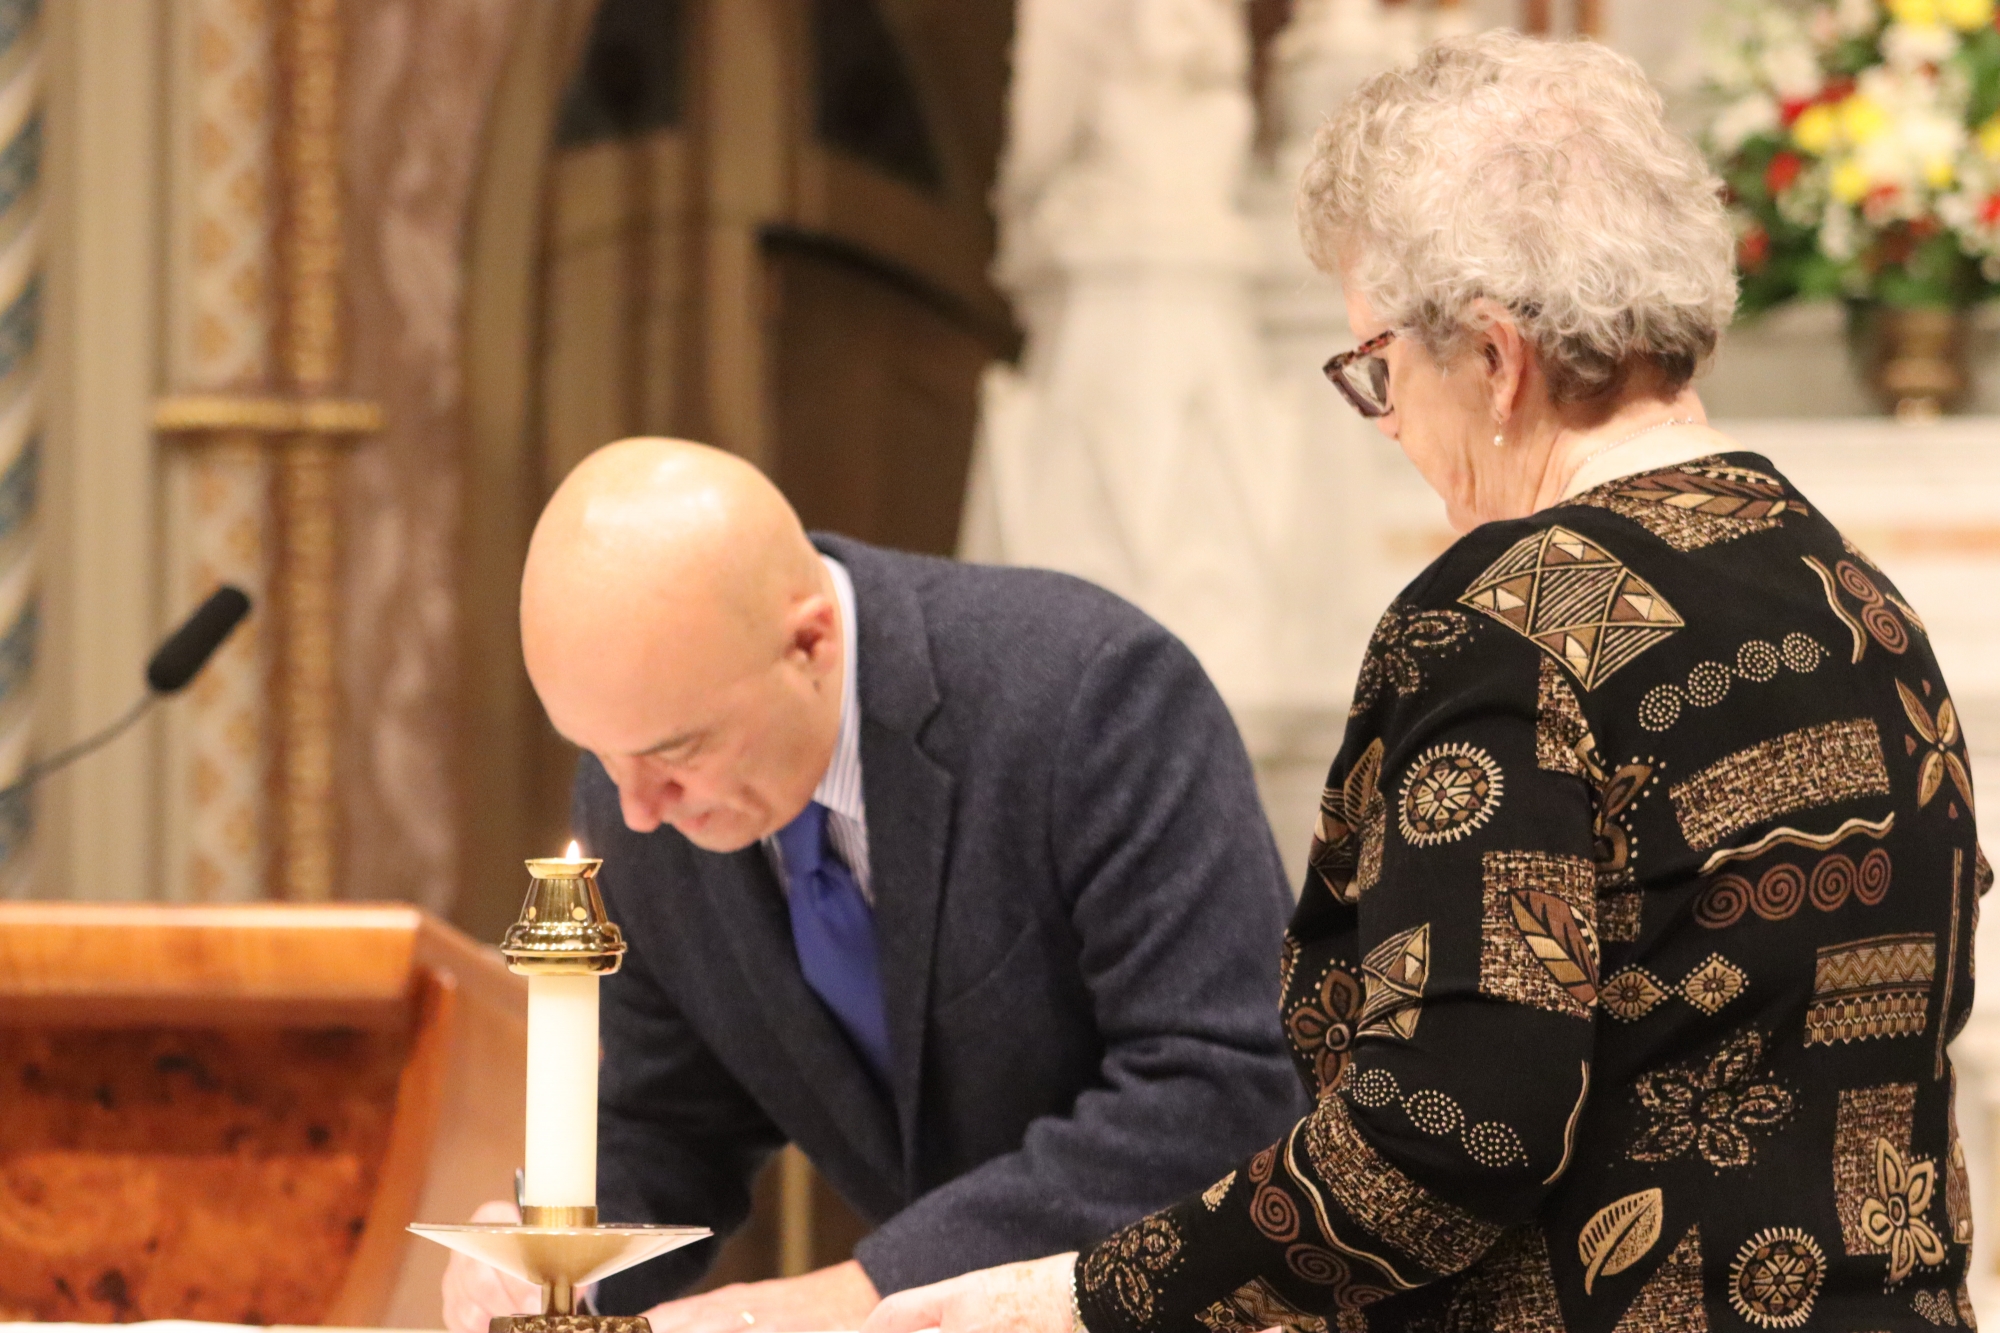 During the Mass of Commitment, Dr. Latimer signed his commitment and dedication to Chestnut Hill College in front of members of the SSJ and CHC communities.